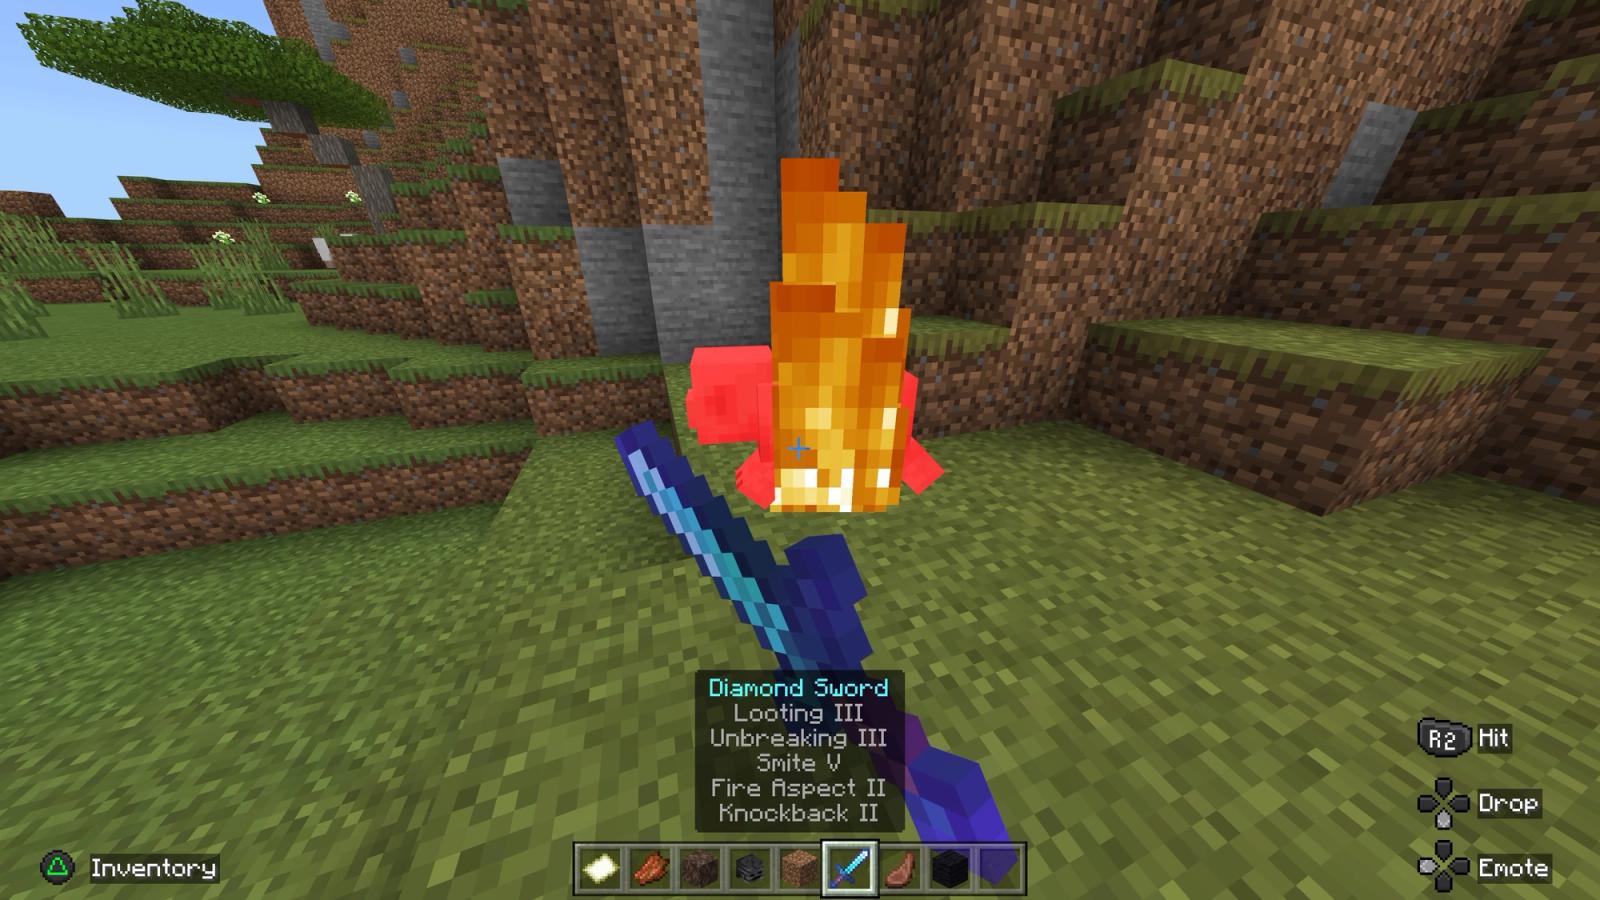 Setting a pig on fire in Minecraft with a Fire Aspect-enchanted sword